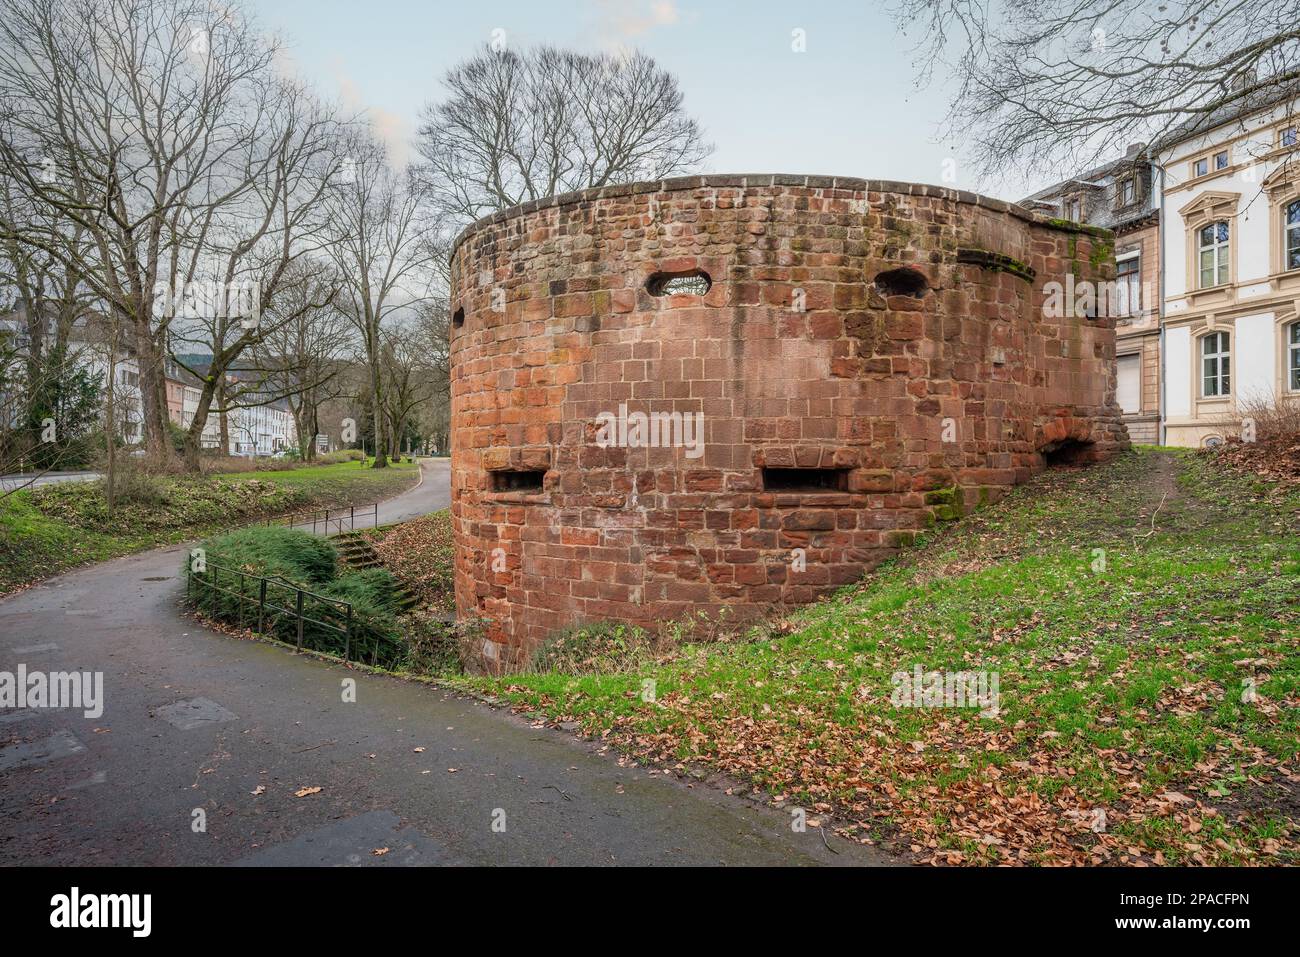 Bastion Sudallee - Trier, Germany Stock Photo